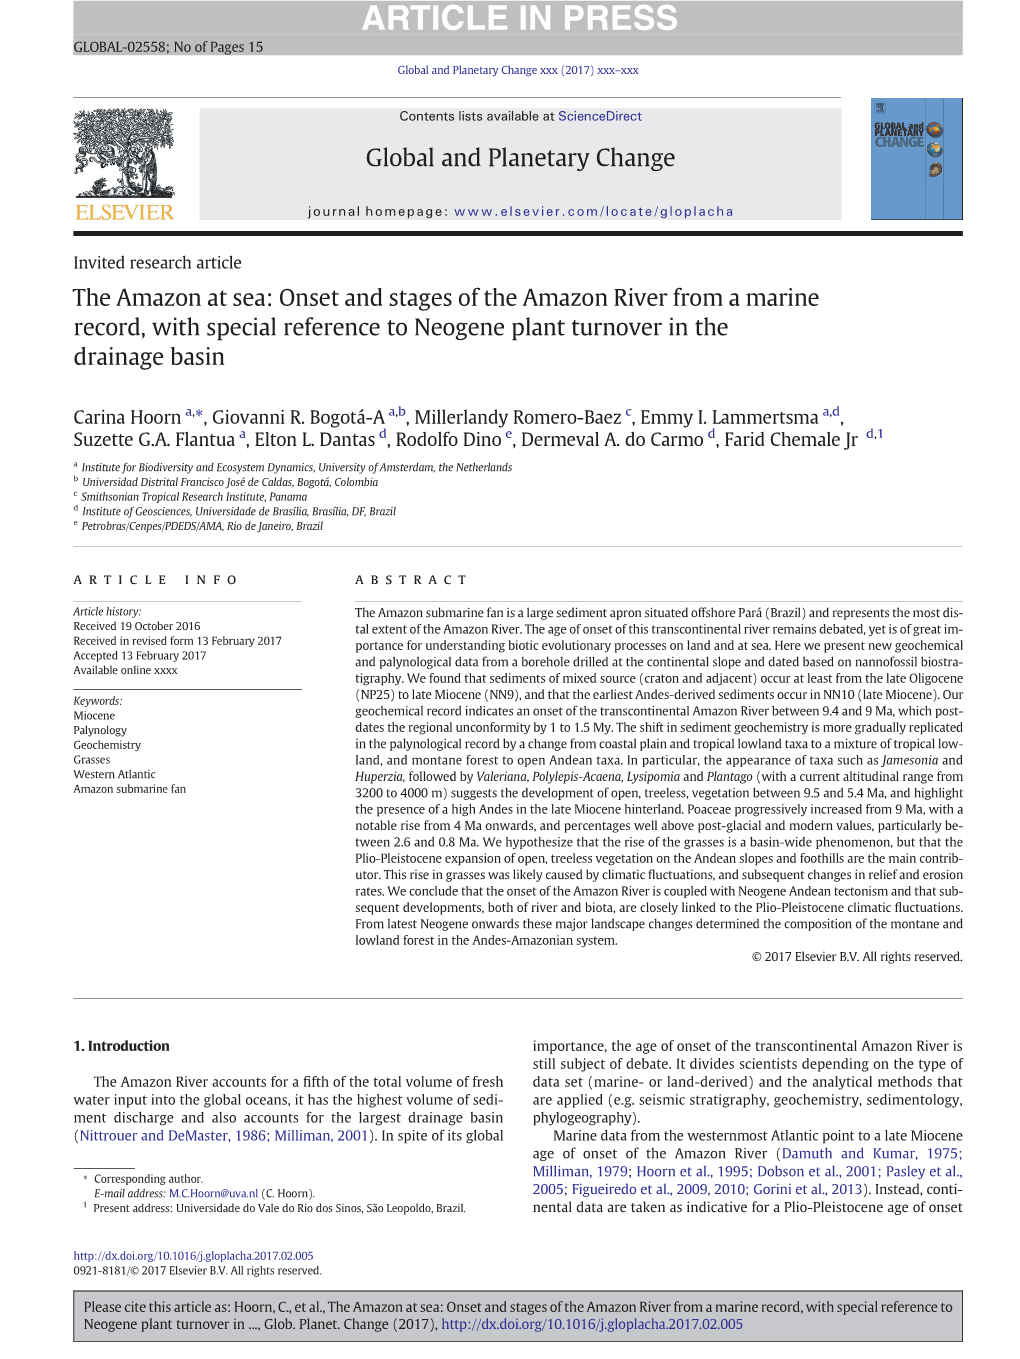 The Amazon at Sea: Onset and Stages of the Amazon River from a Marine Record, with Special Reference to Neogene Plant Turnover in the Drainage Basin